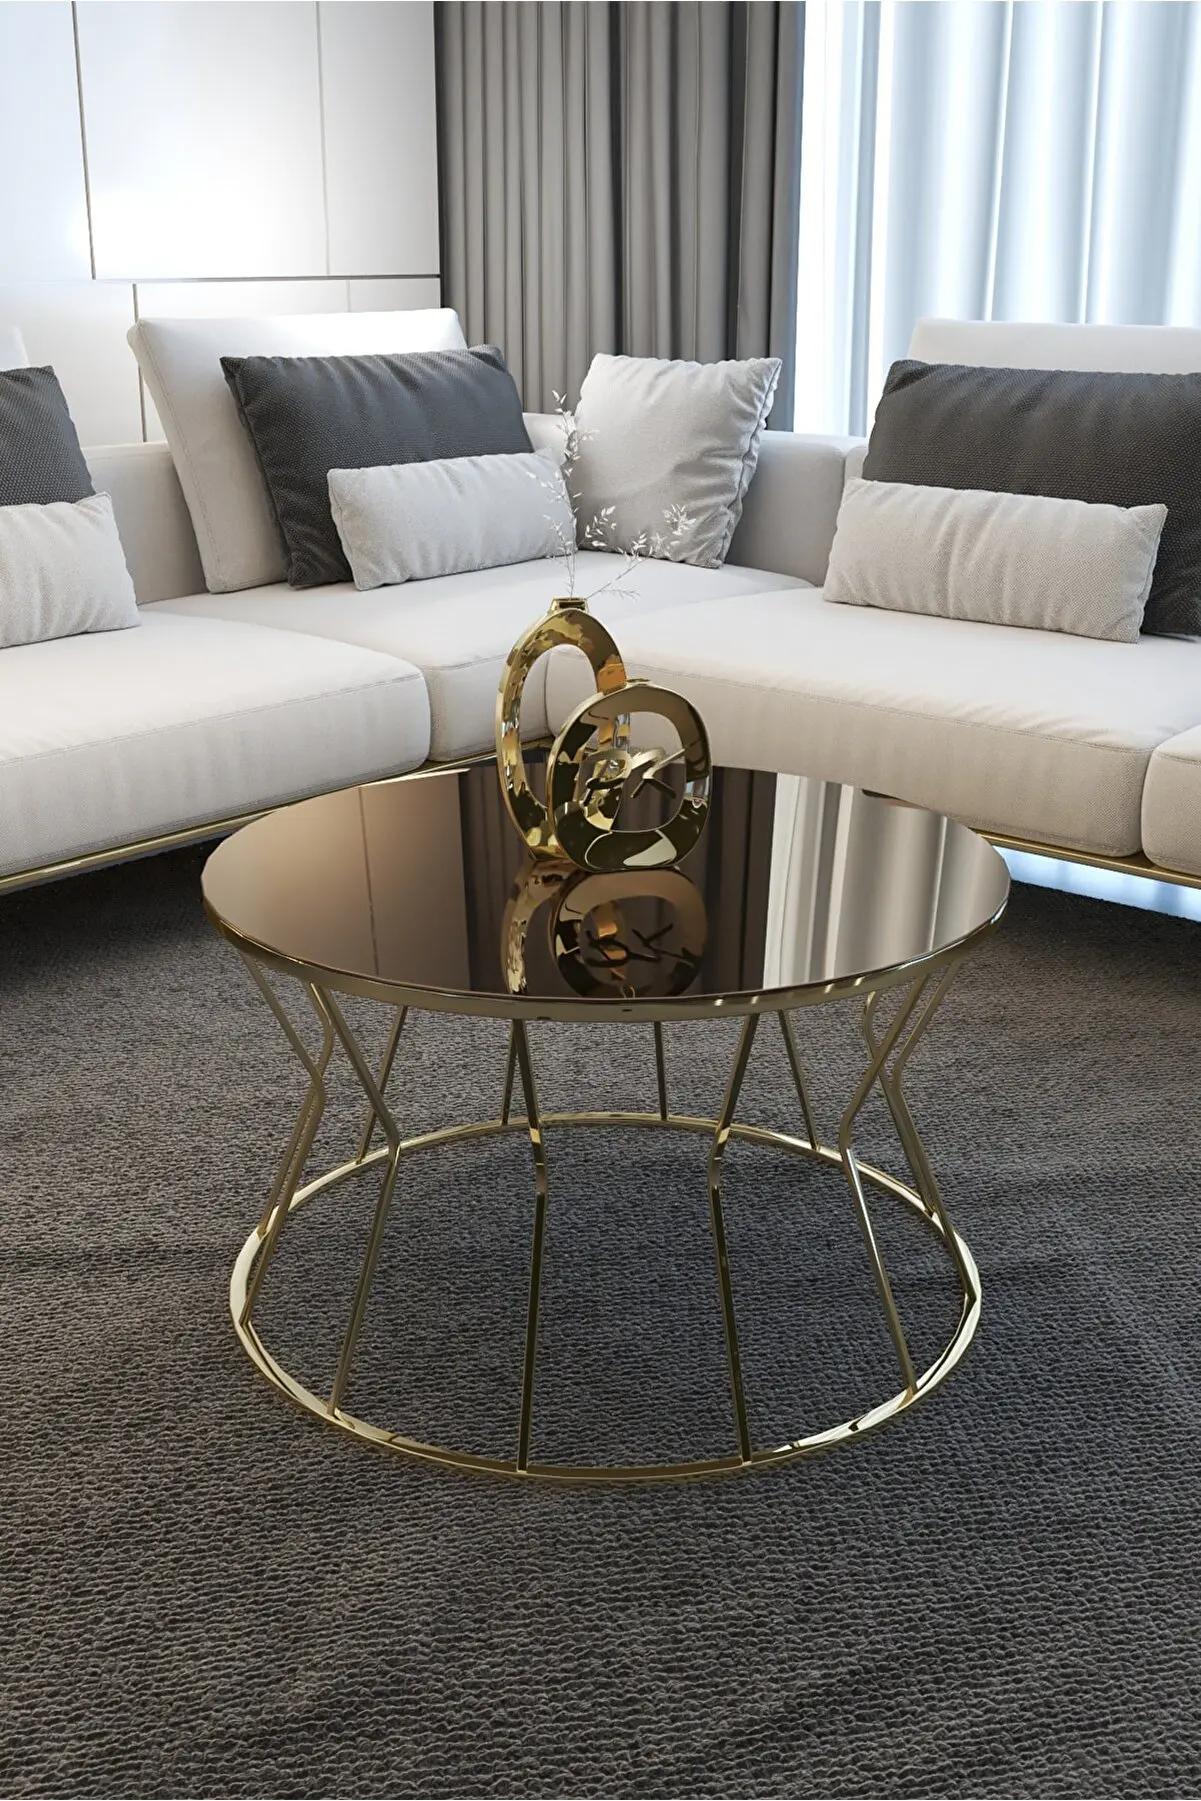 HOURCLOCK COFFEE TABLE METAL WORK TABLE CENTER TABLE GOLD LEG BRONZE MIRROR GLASS DINING TABLE MODERN offex archtech modern end table 24 in gold clear glass